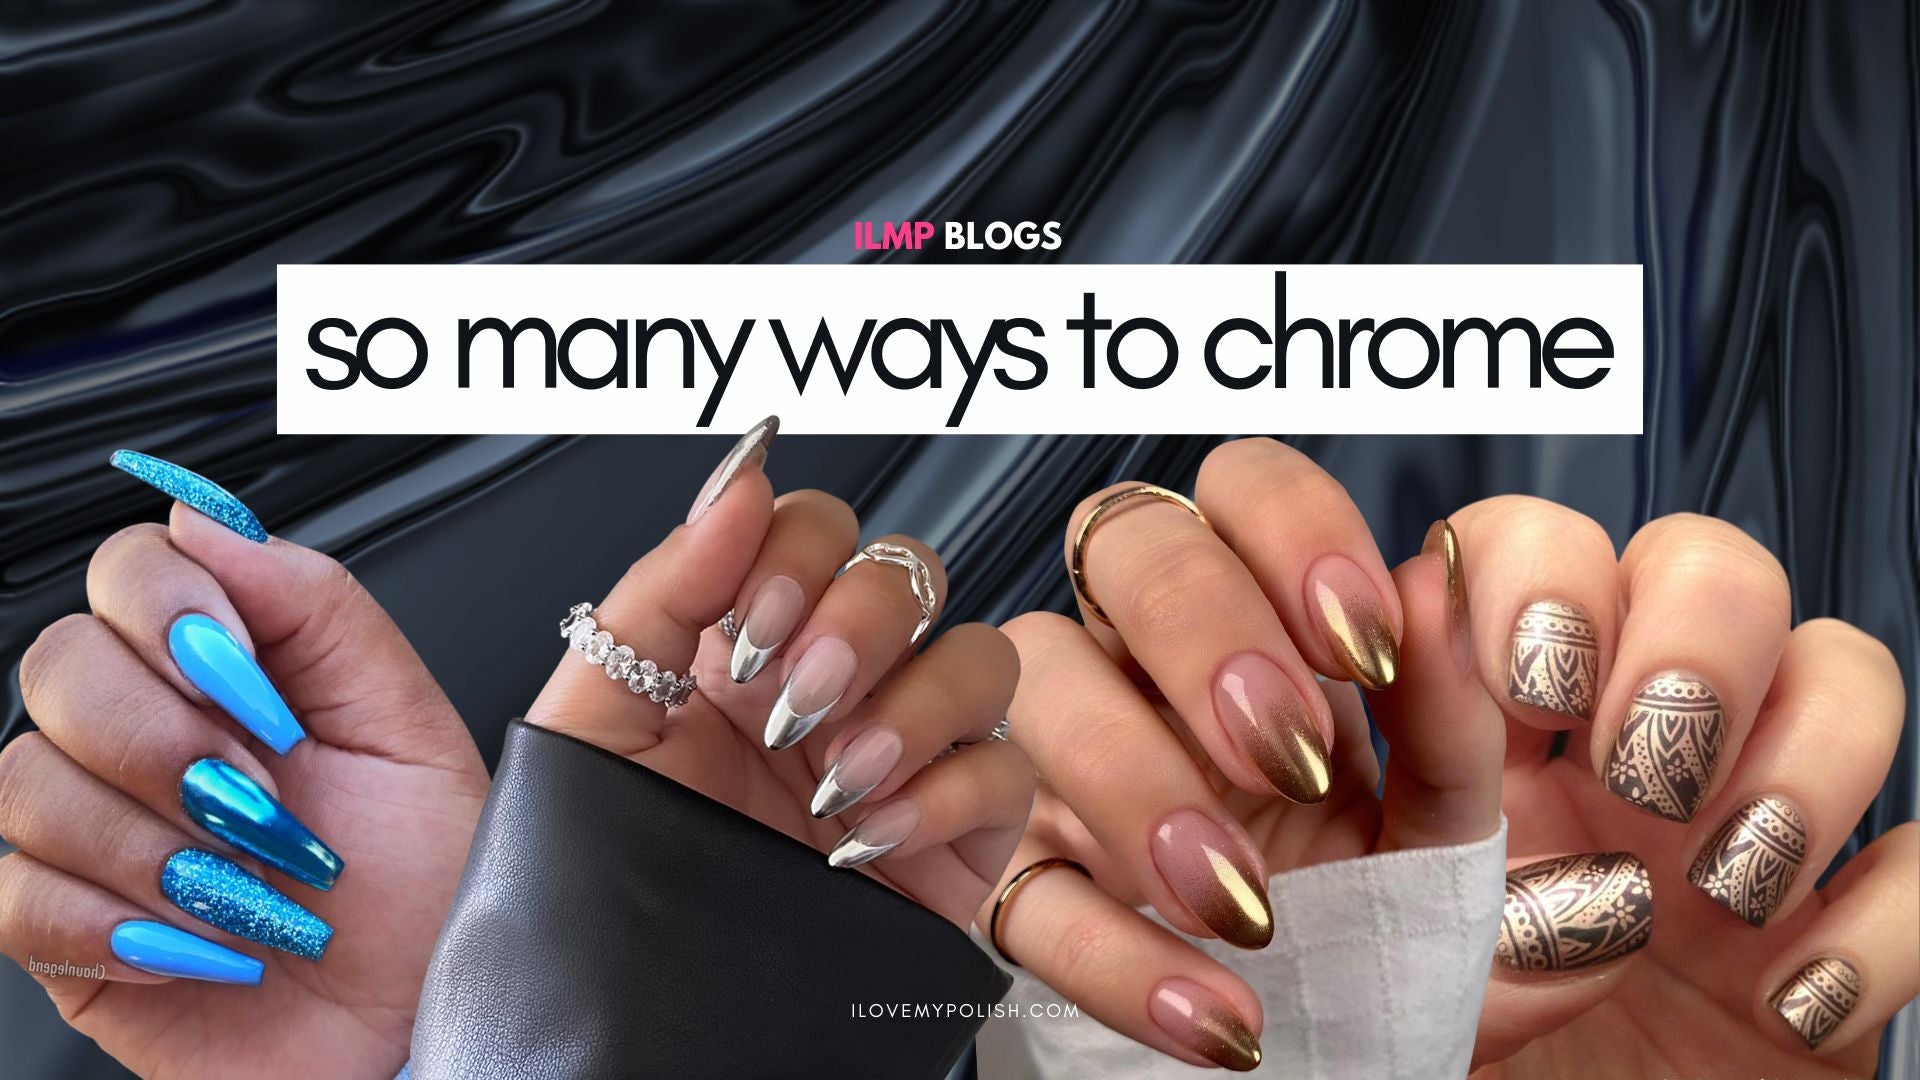 Chrome Drip Nails Are the Edgy Mani Trend to Try This Spring